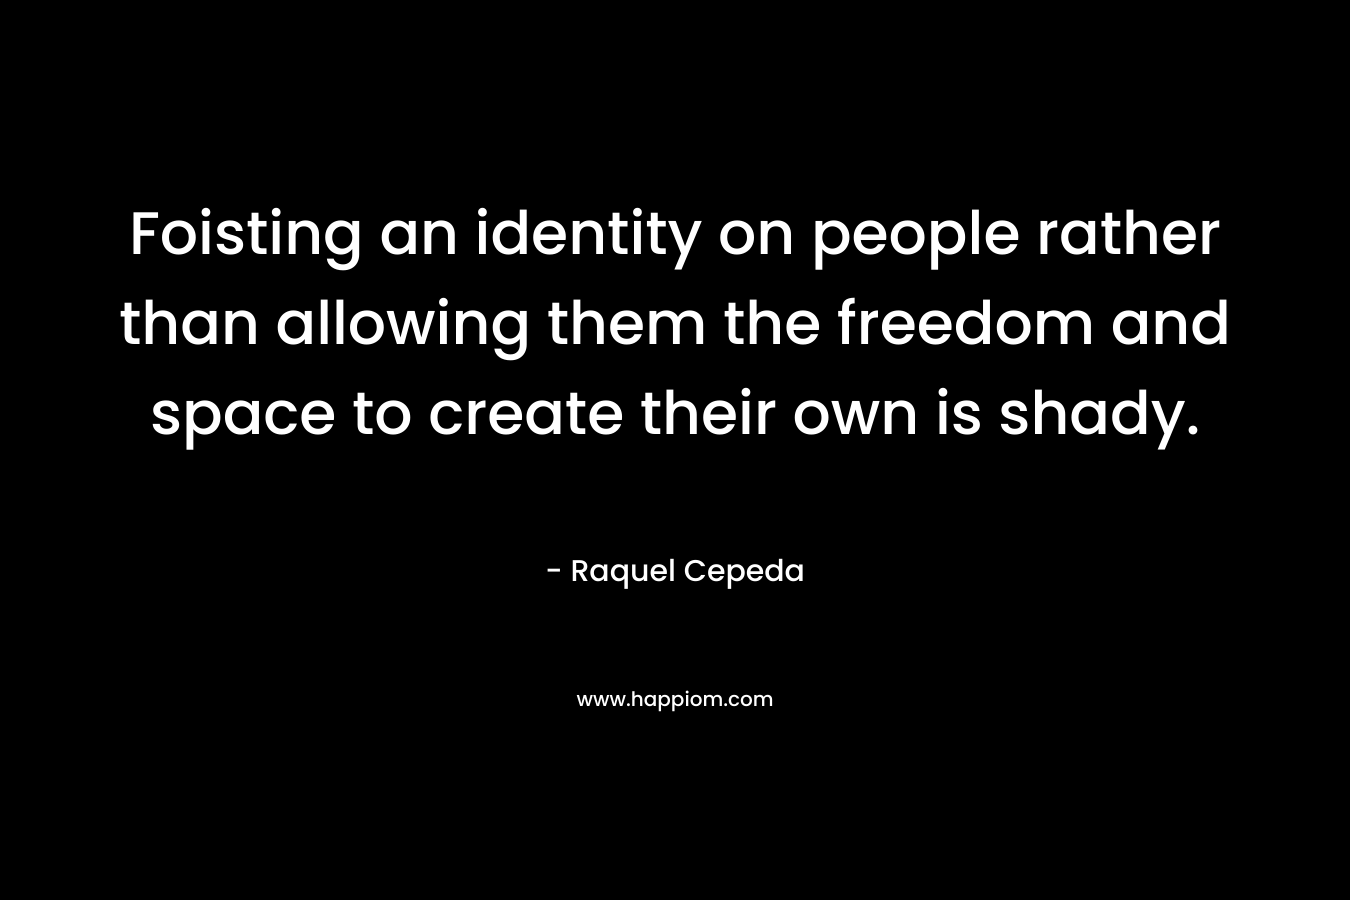 Foisting an identity on people rather than allowing them the freedom and space to create their own is shady. – Raquel Cepeda